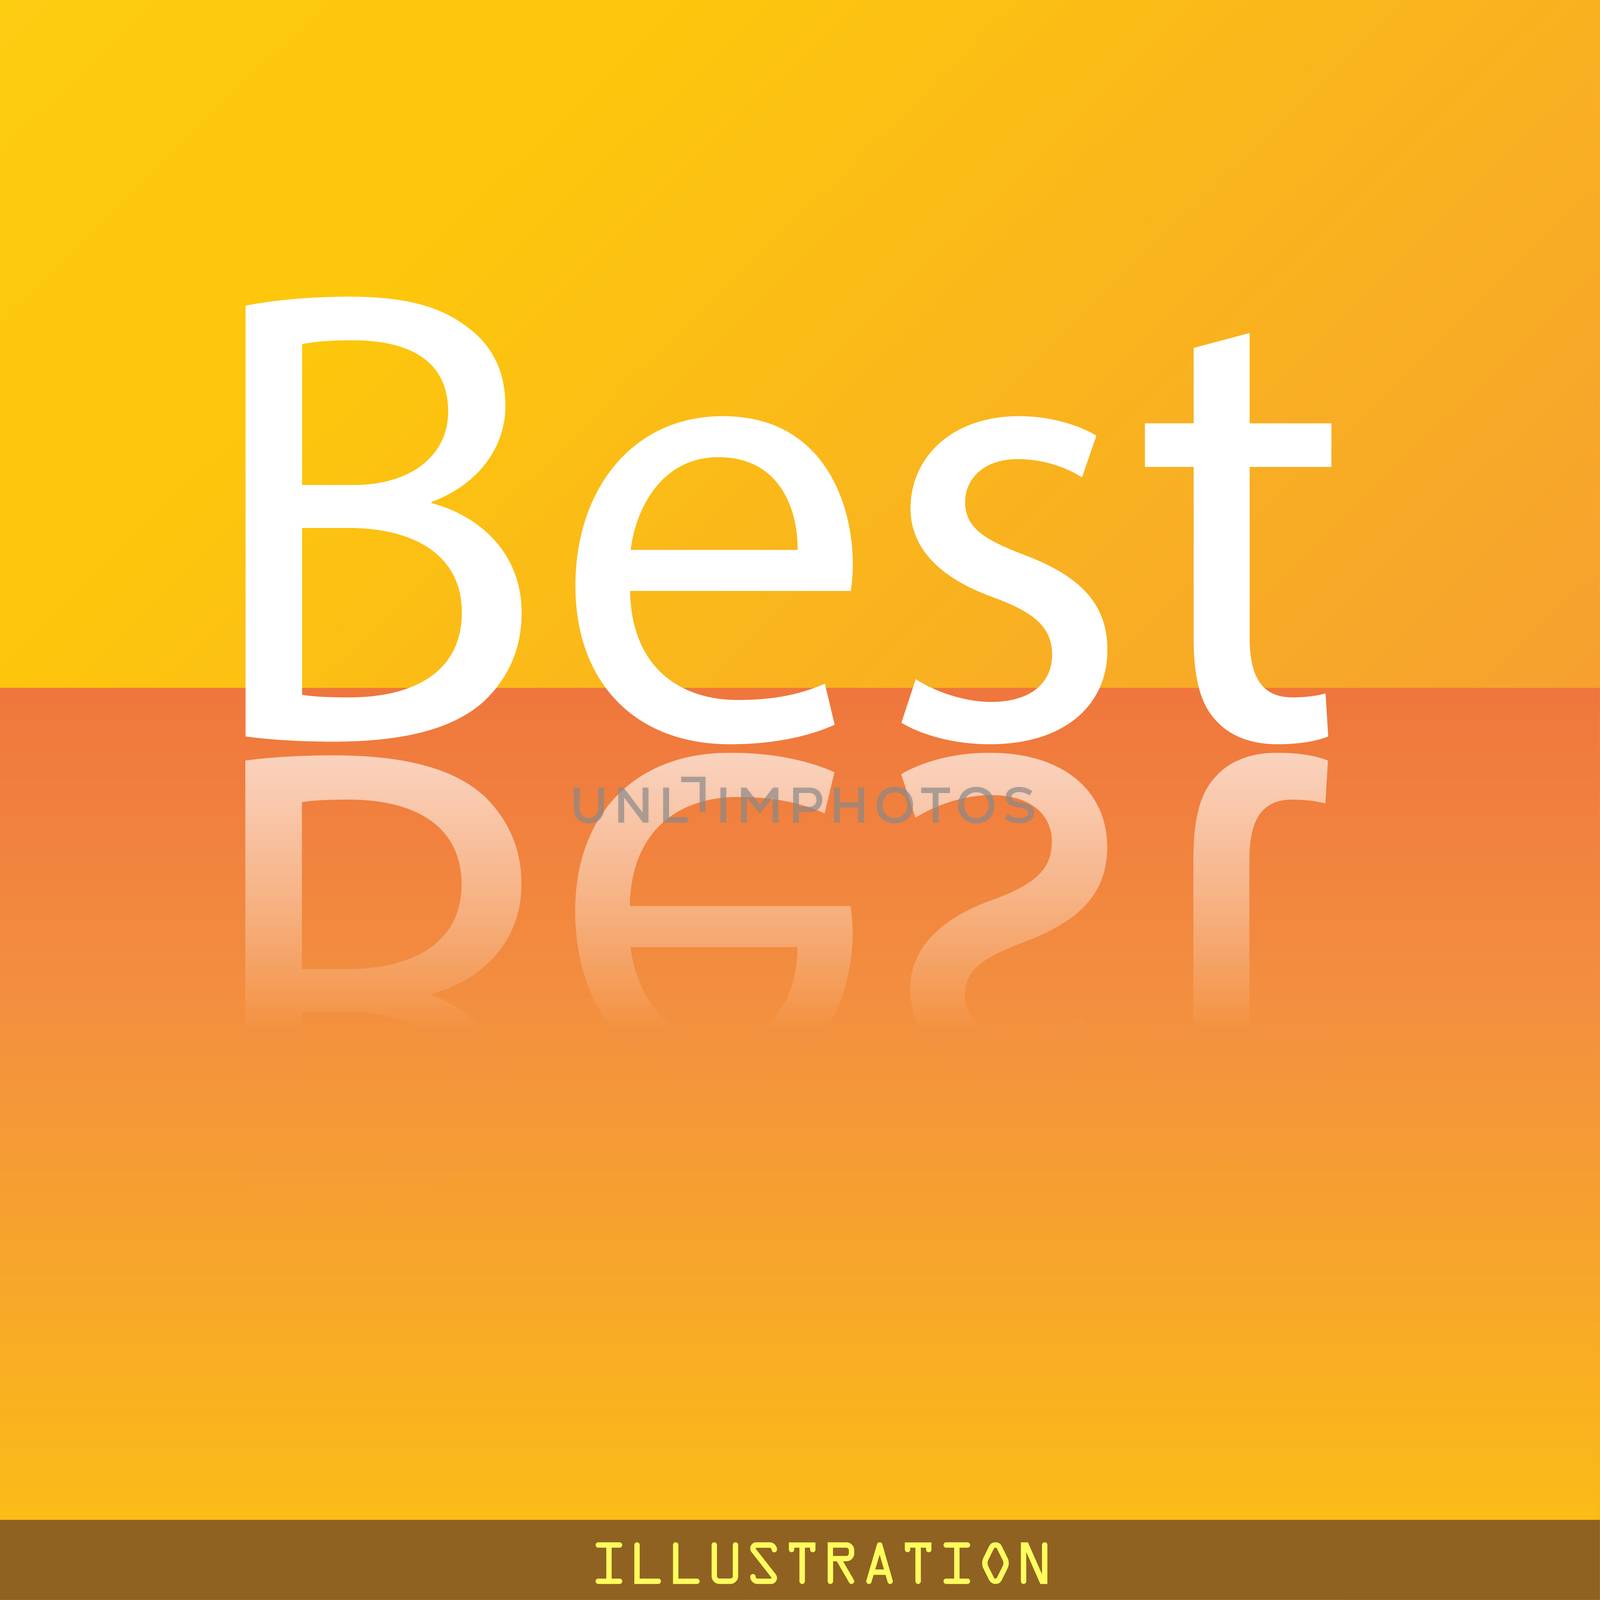 Best seller icon symbol Flat modern web design with reflection and space for your text. illustration. Raster version